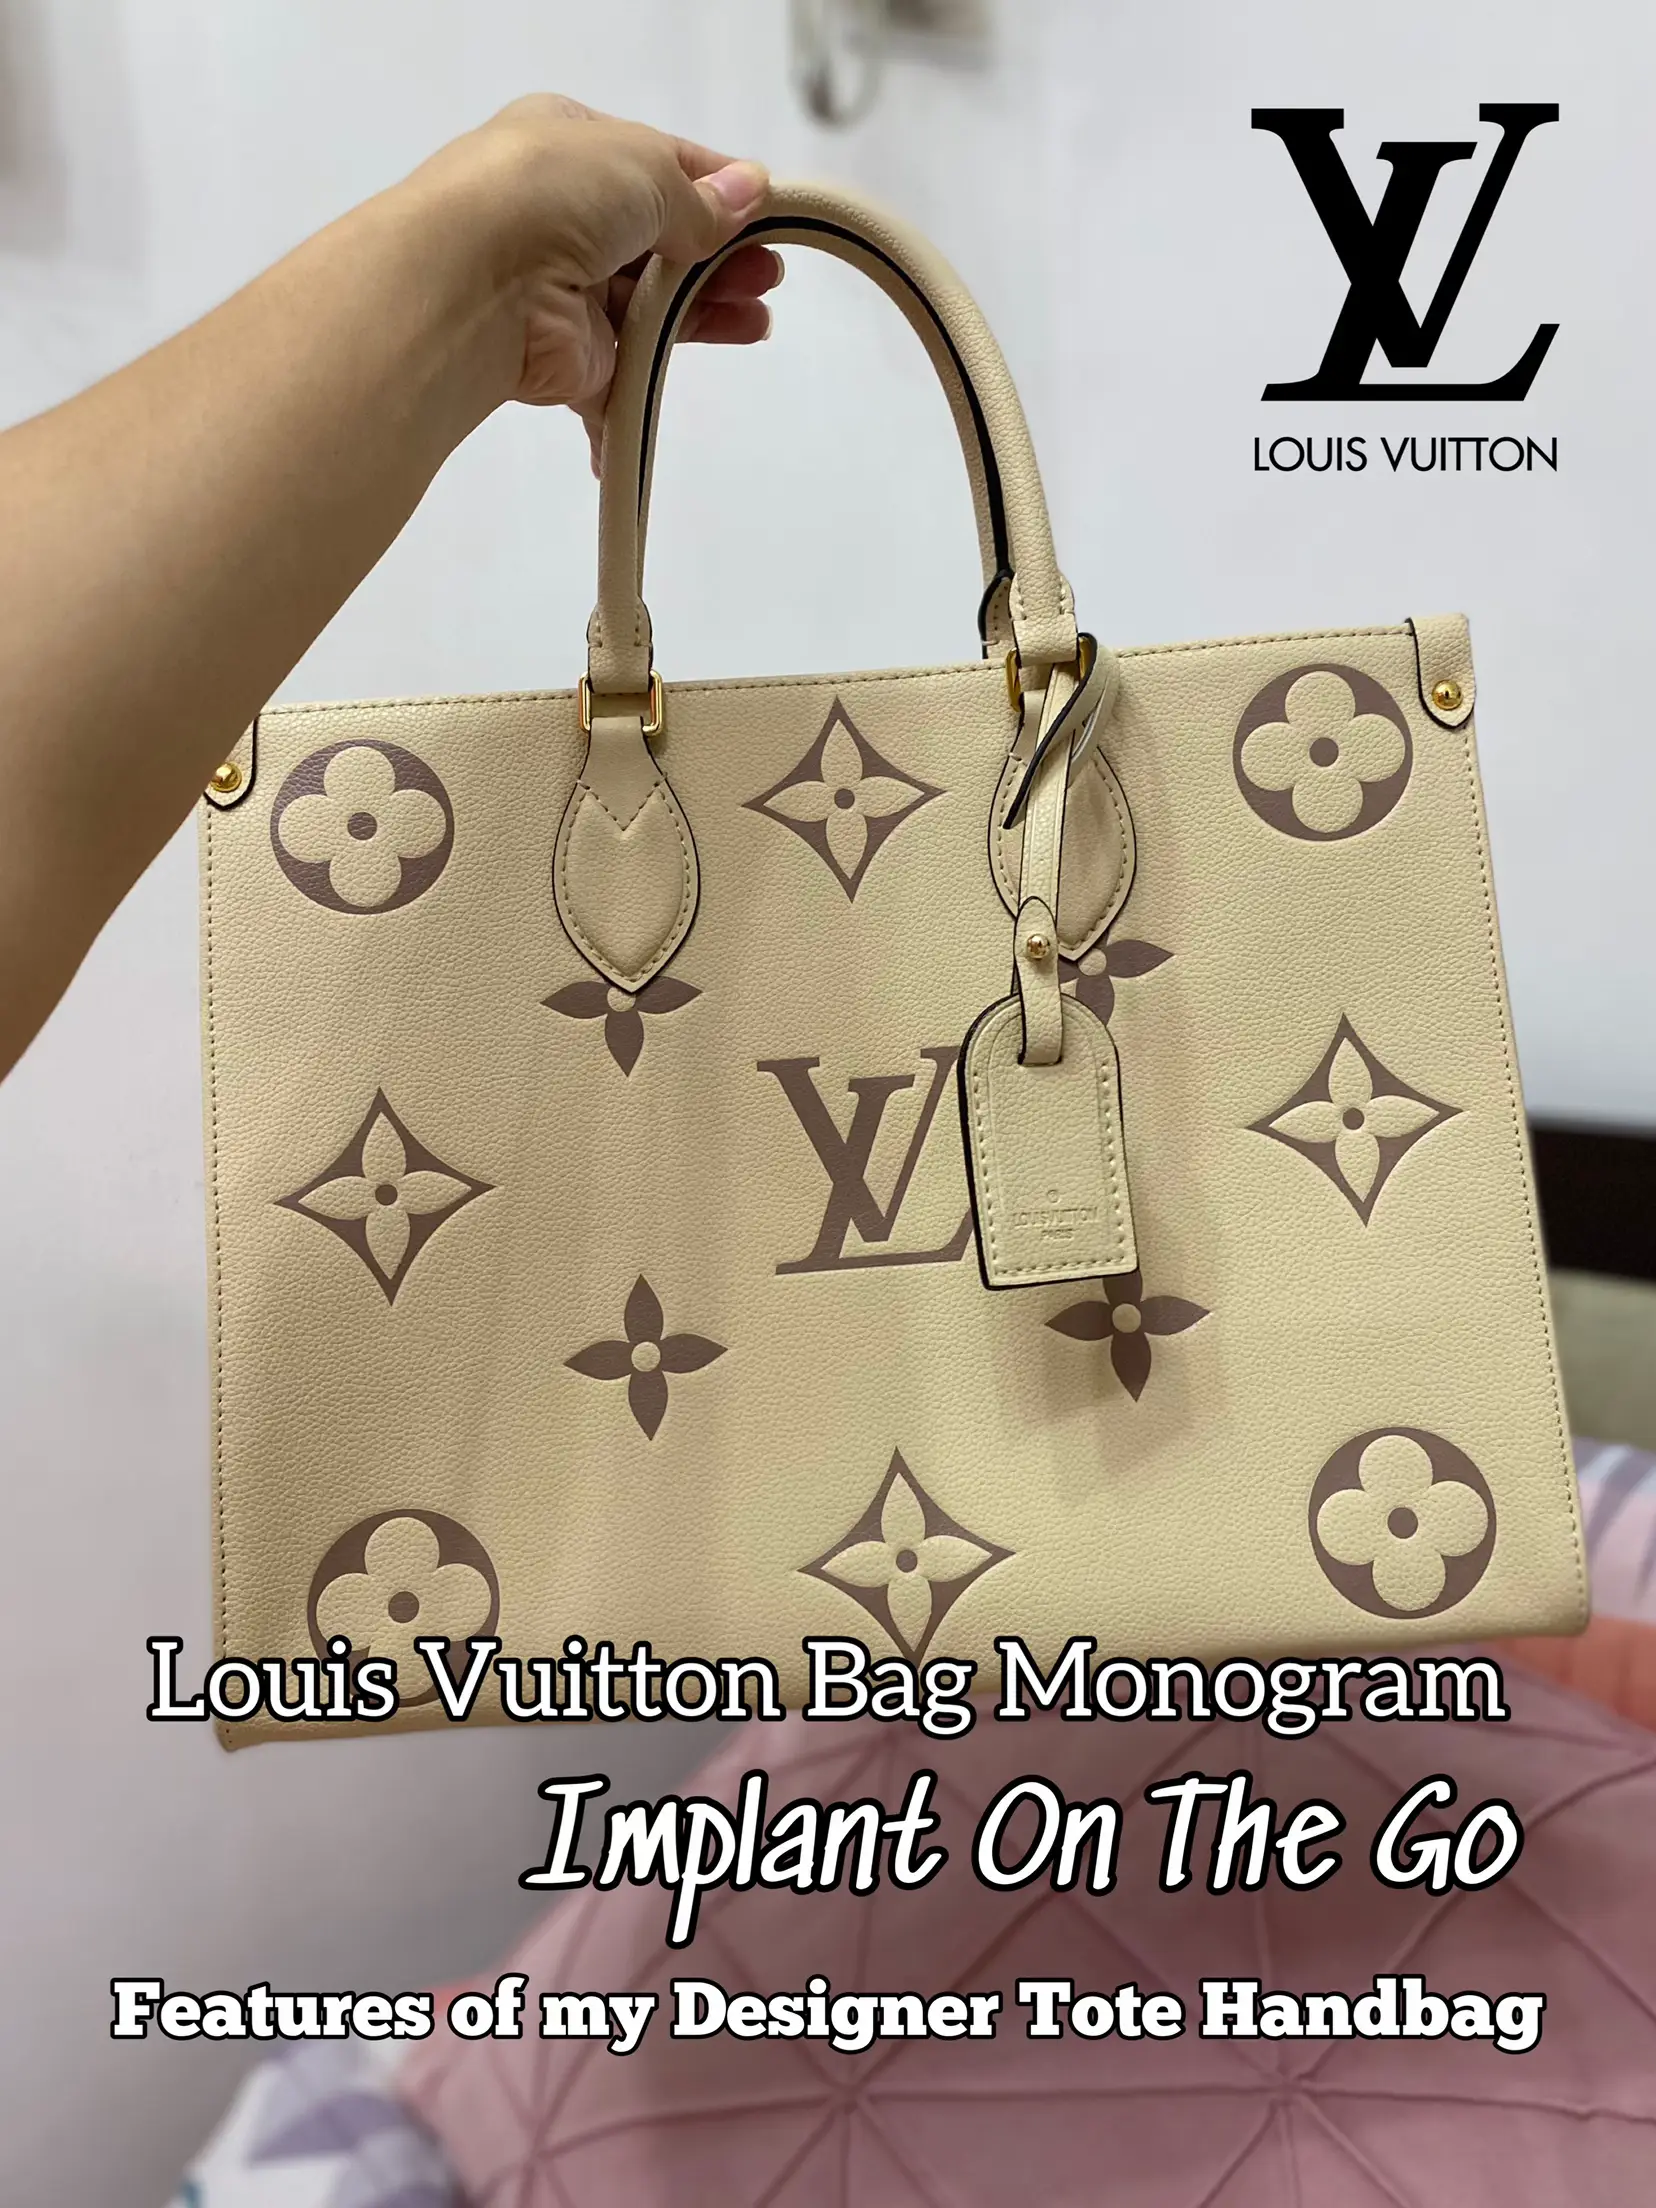 I'm eyeing the NeoNoe in Empreinte Leather. Opinions on LV